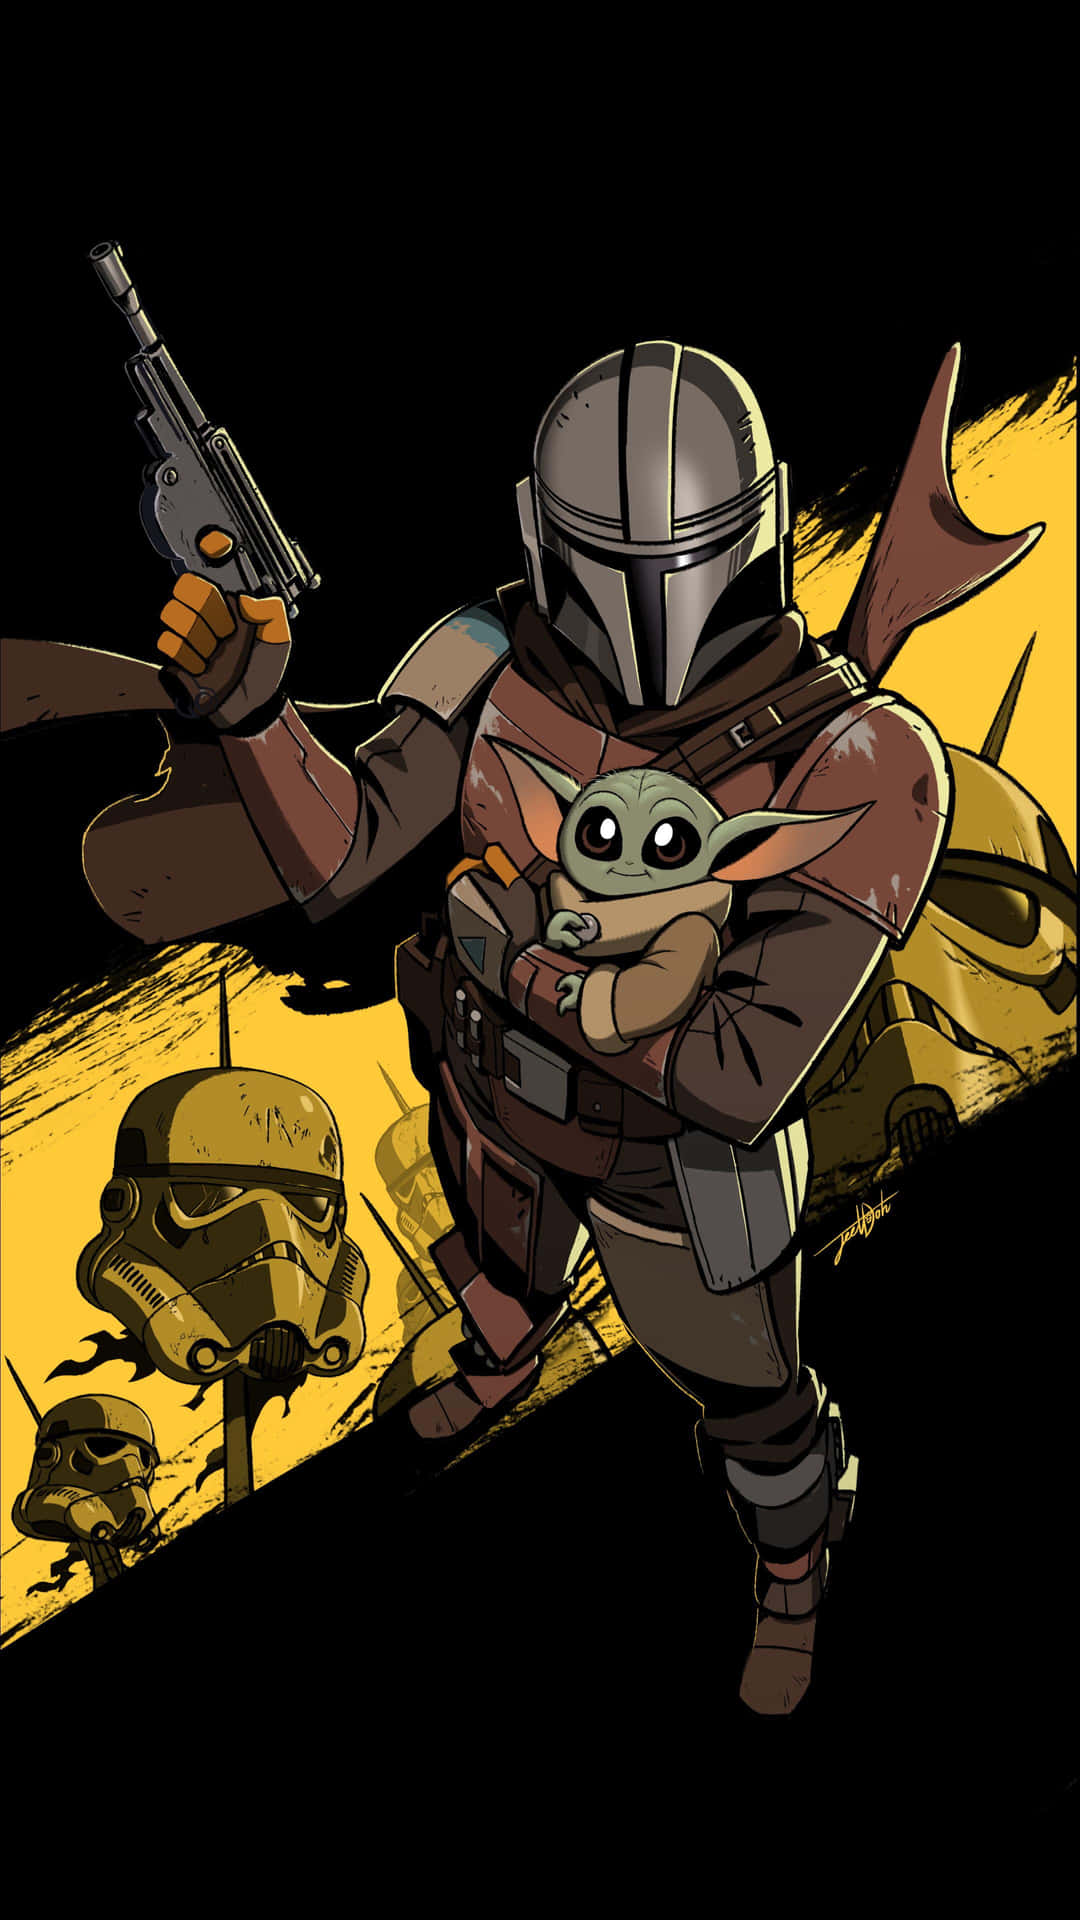 The Mandalorian with Baby Yoda in stunning universe backdrop